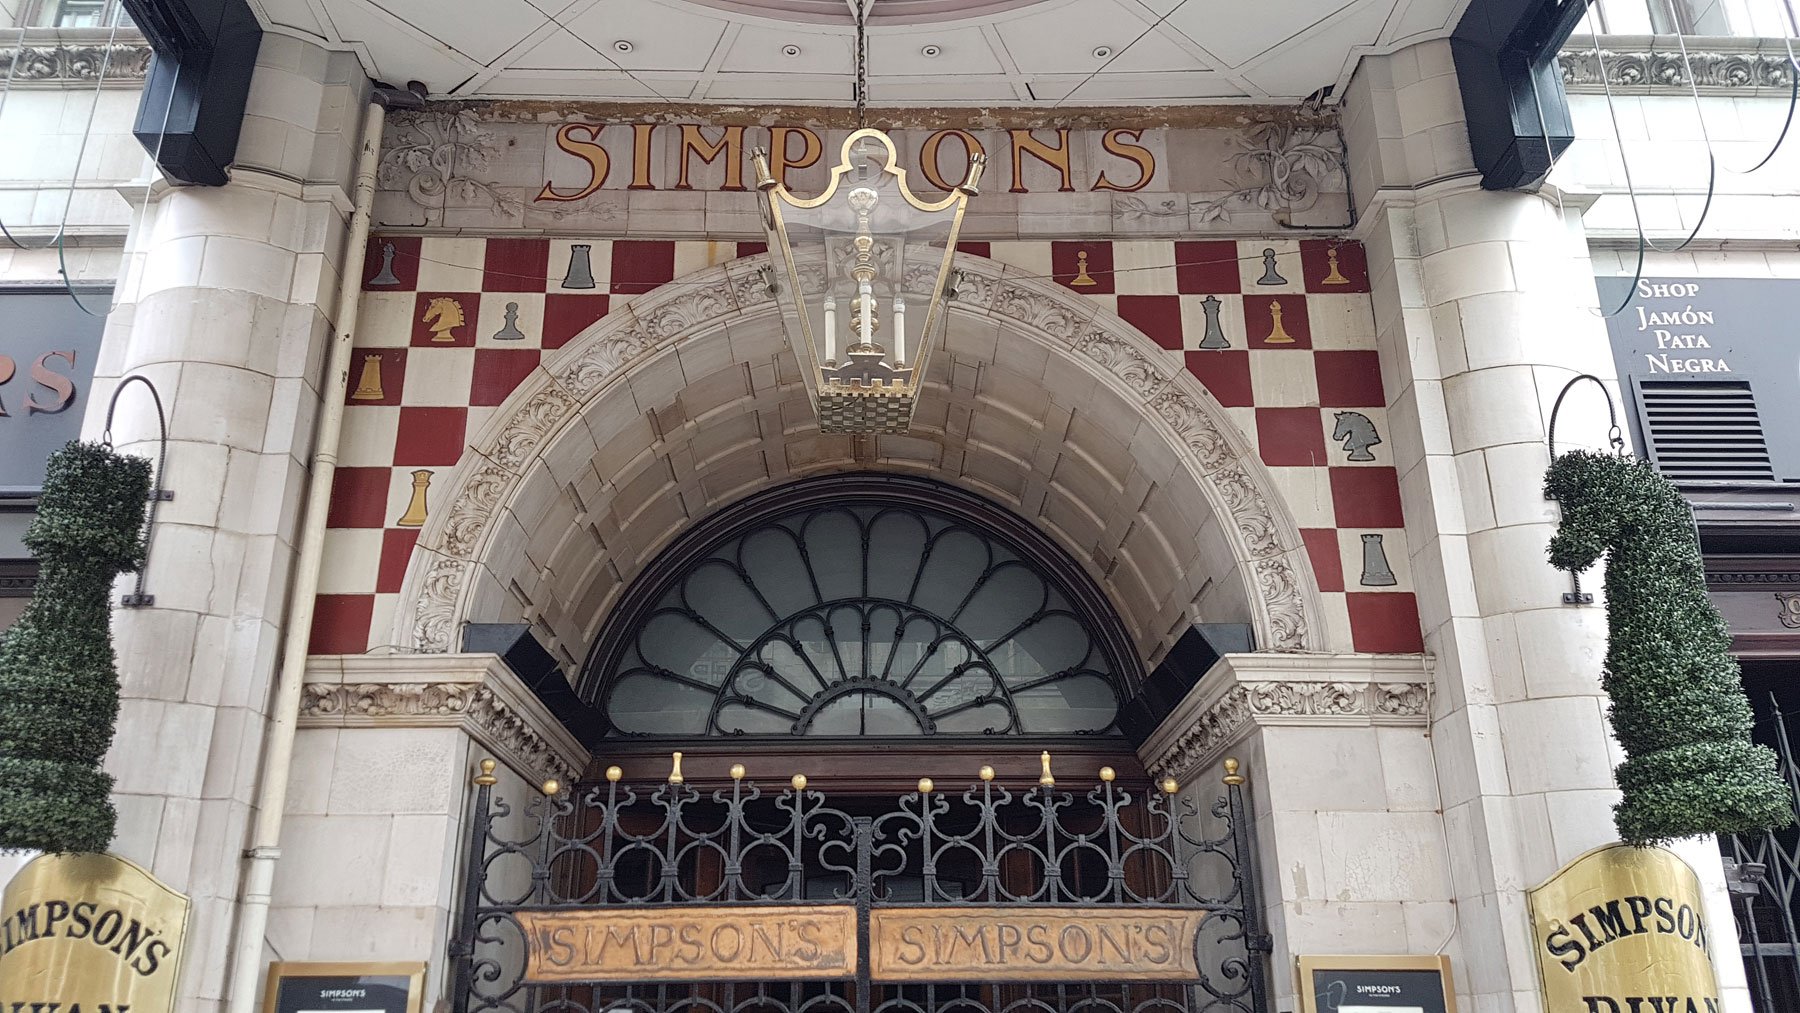 Simpson’s in the Strand selling off surplus fixtures and fittings